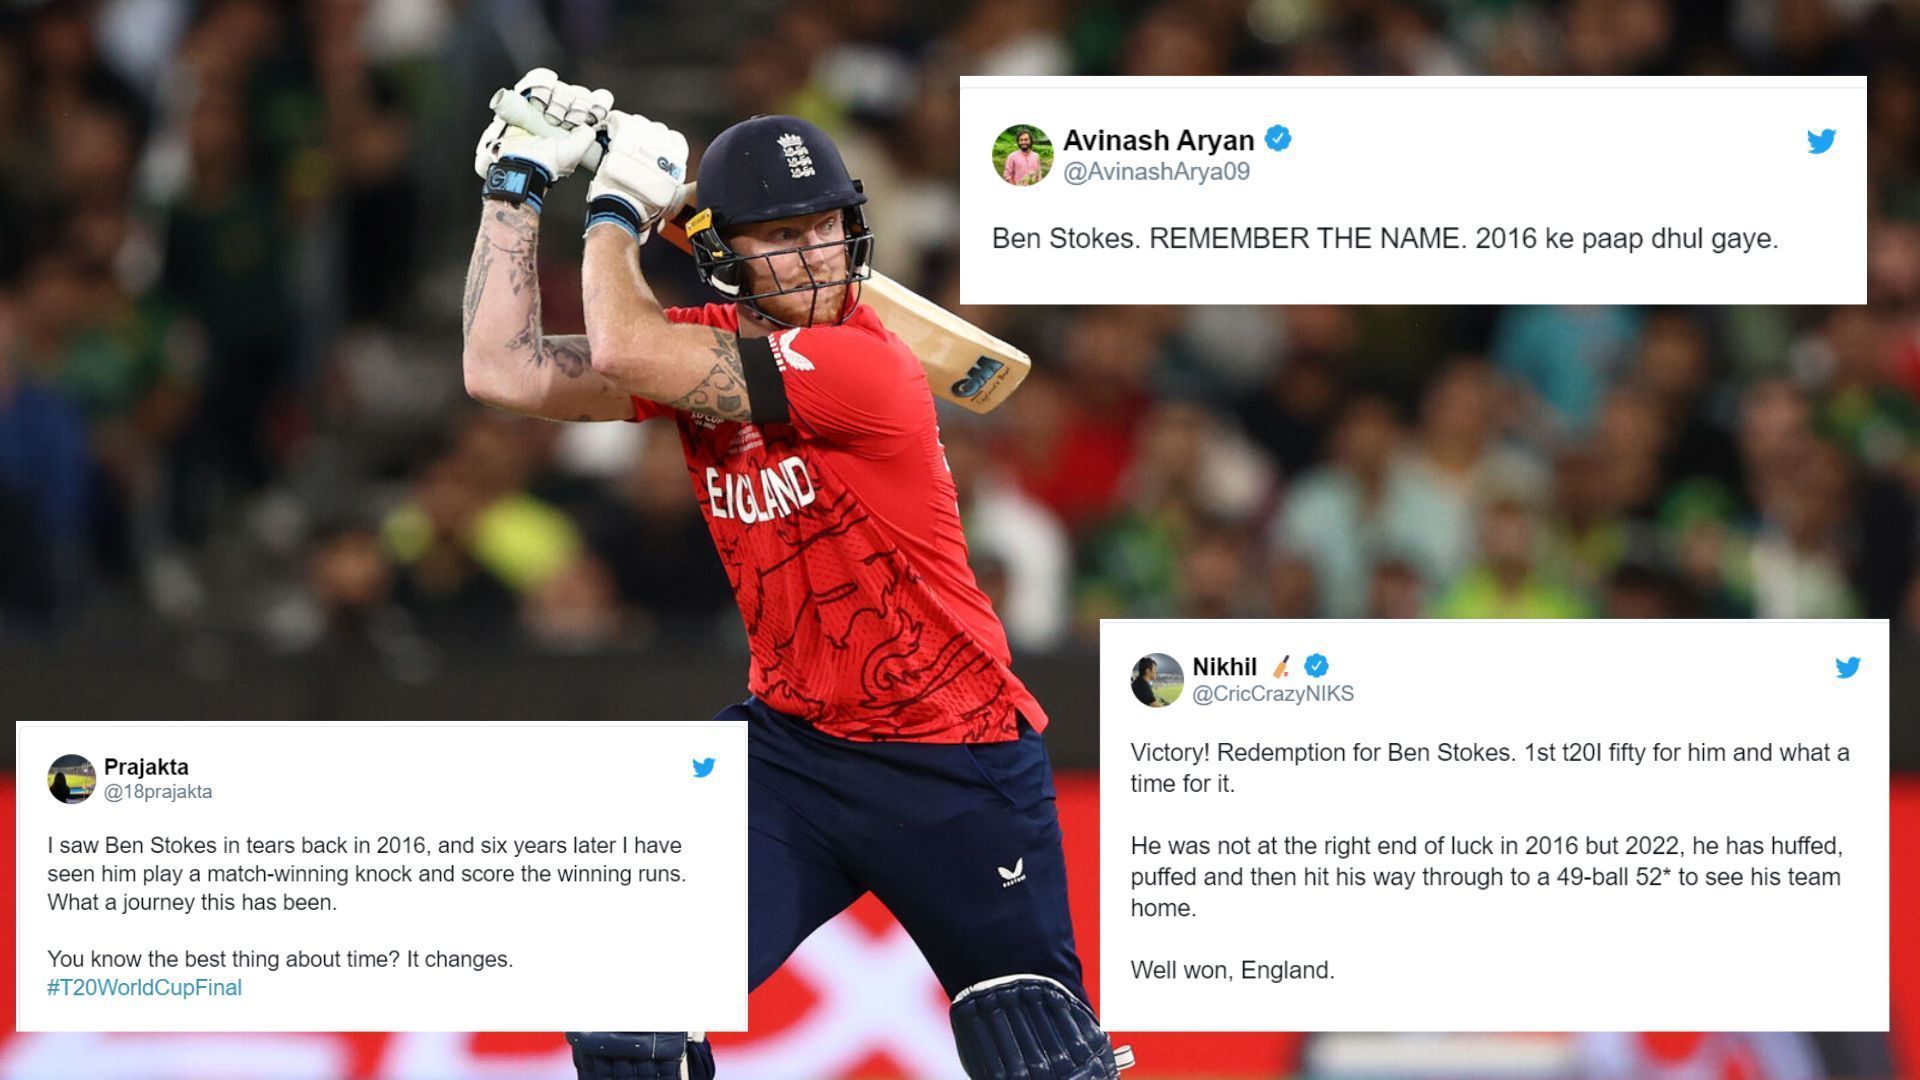 T20 World Cup 2022: &quot;You know the best thing about time? It changes&quot; - Twitterati in awe of Ben Stokes as he leads England to the title 